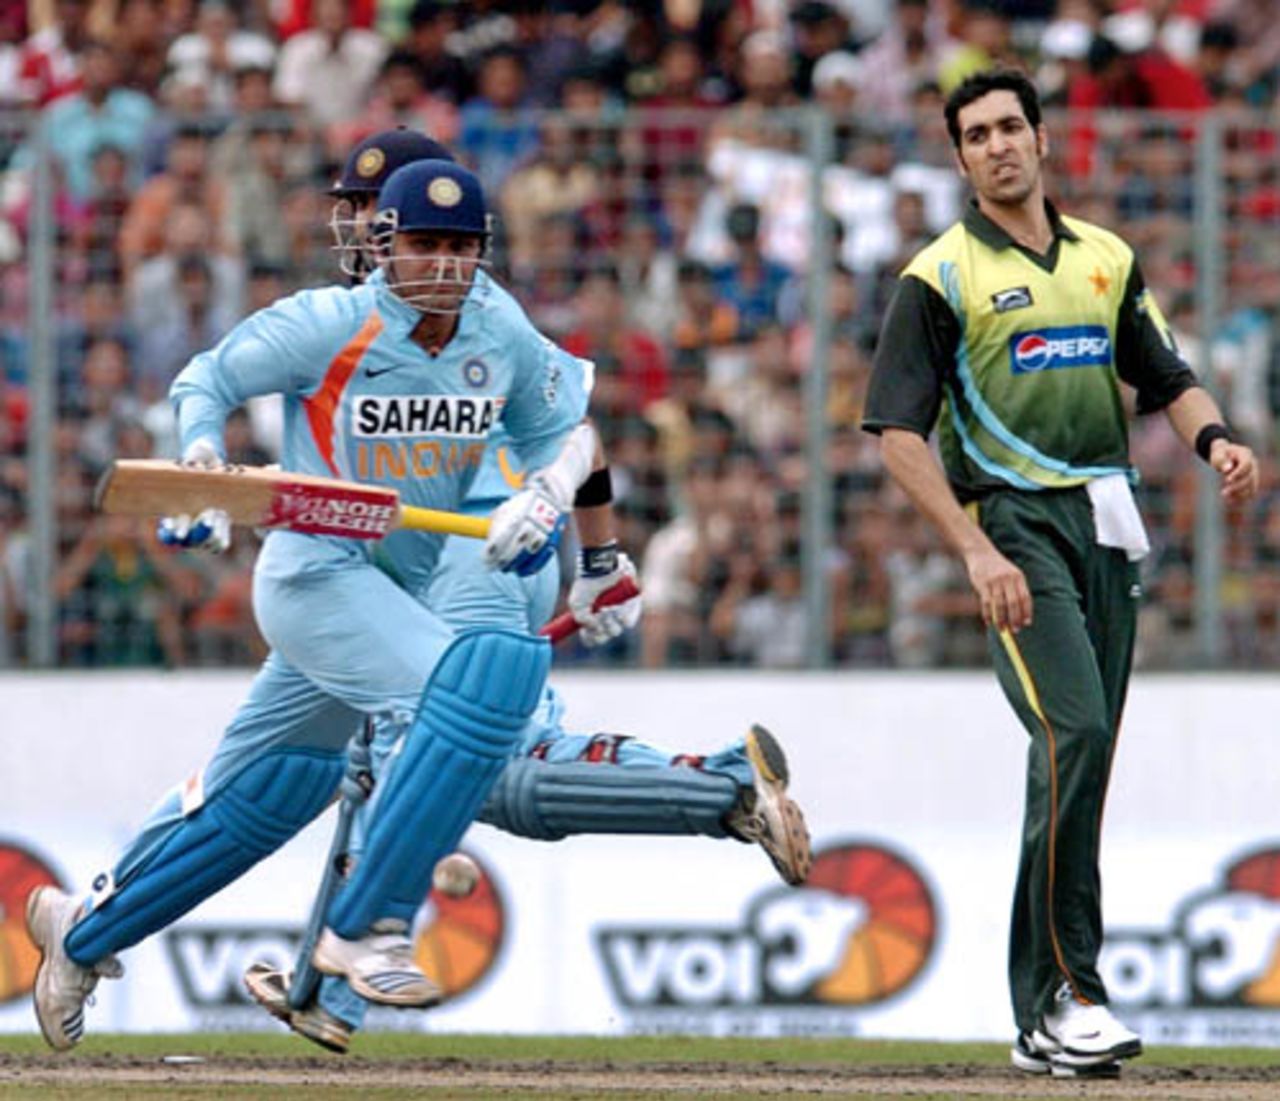 Virender Sehwag rushes for a run as Umar Gul looks on, India v Pakistan, Kitply Cup, Mirpur, June 10, 2008 